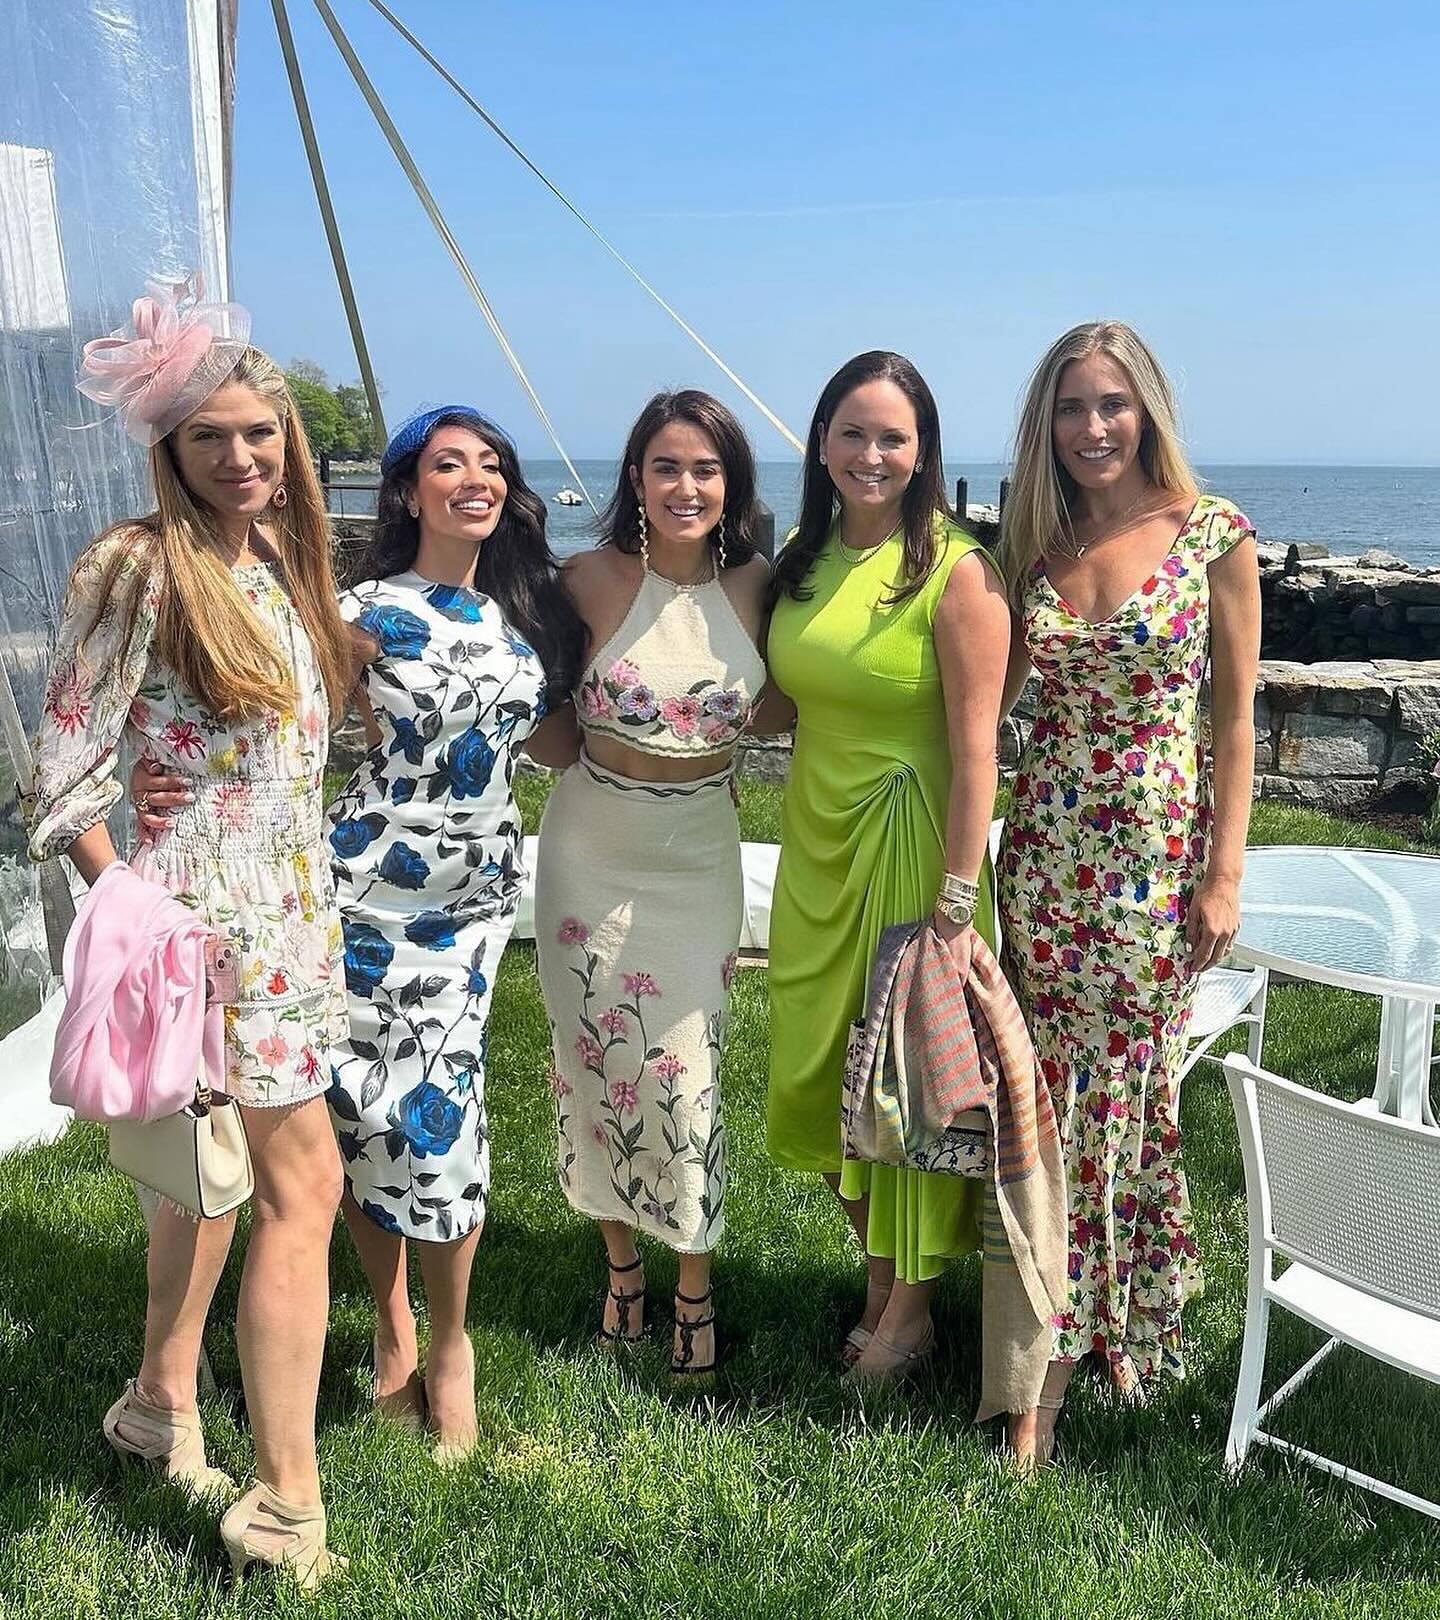 Stunning captures from the most stylish event of the season 📸 
The stunning ladies at @ywcagreenwich hosted their 19th annual Old Bags Luncheon &amp; it was an affair to remember! The beautiful and successful event benefitted YWCA&rsquo;s Harmony Pr